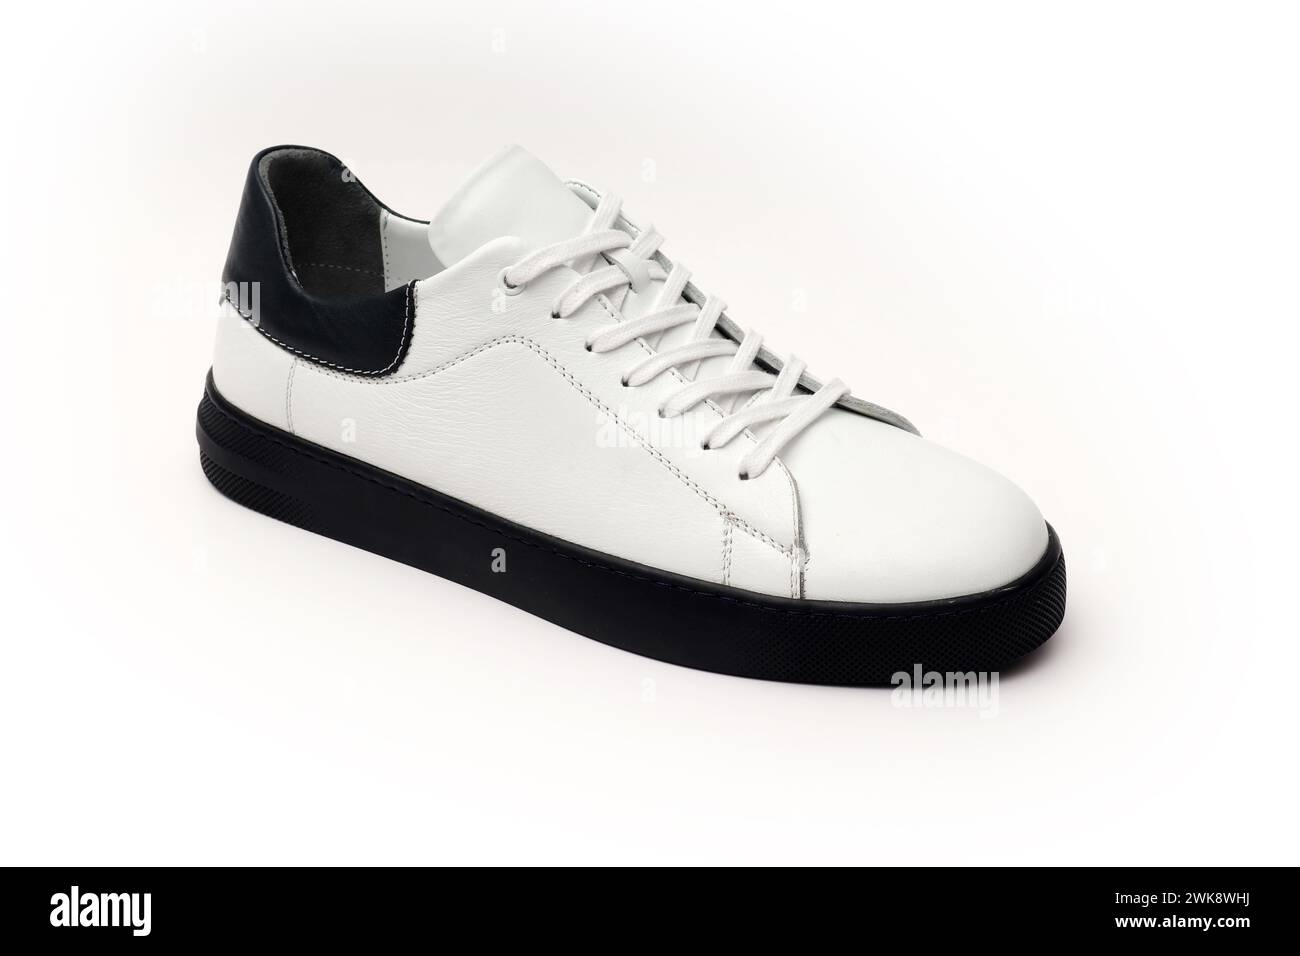 Comfortable sneakers for men on a white background. Stock Photo